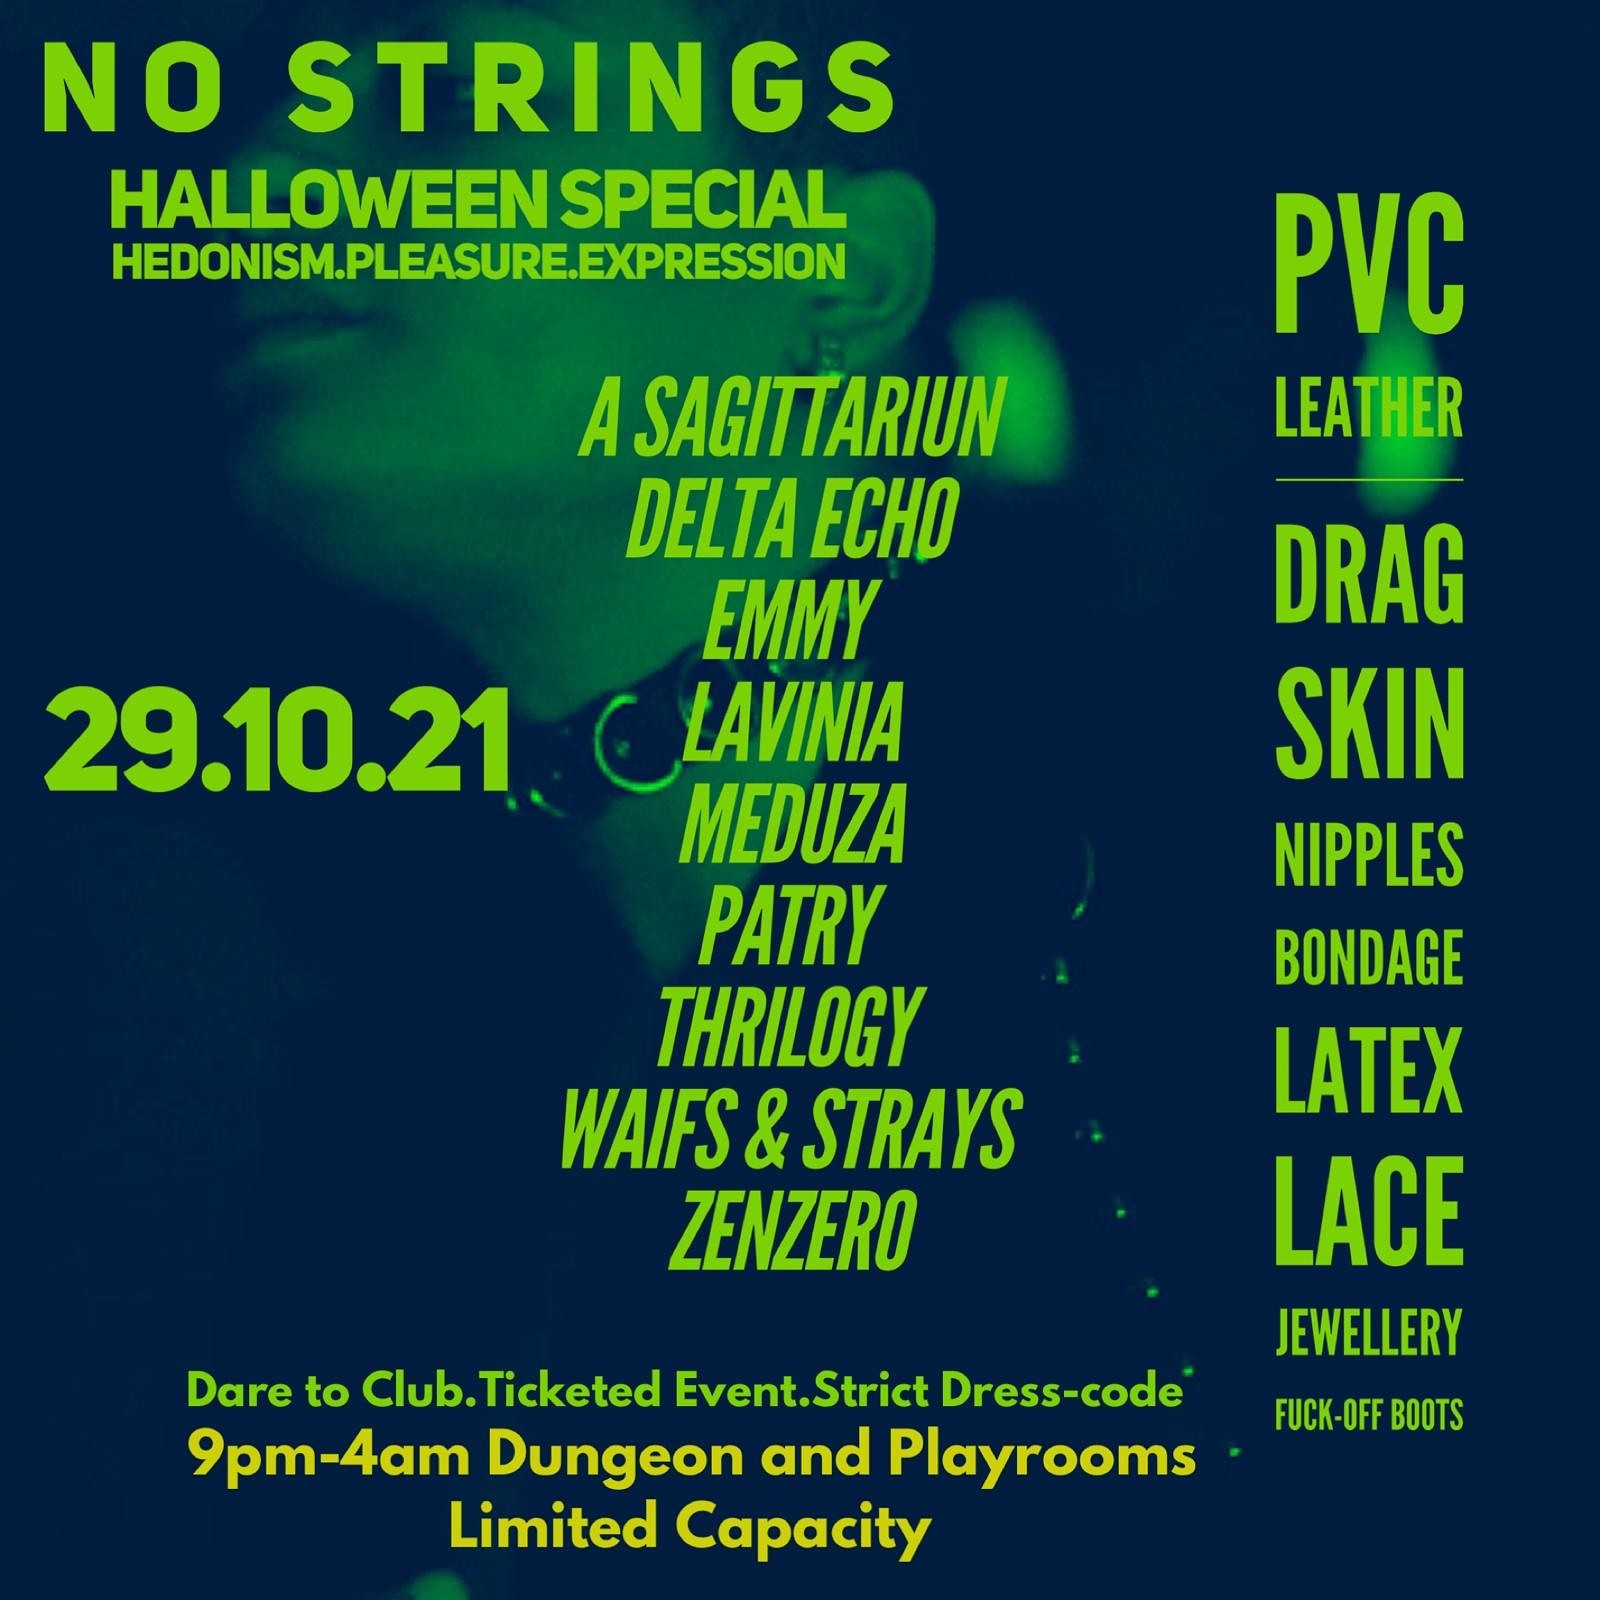 NO STRINGS HALLOWEEN SPECIAL at Dare to Club